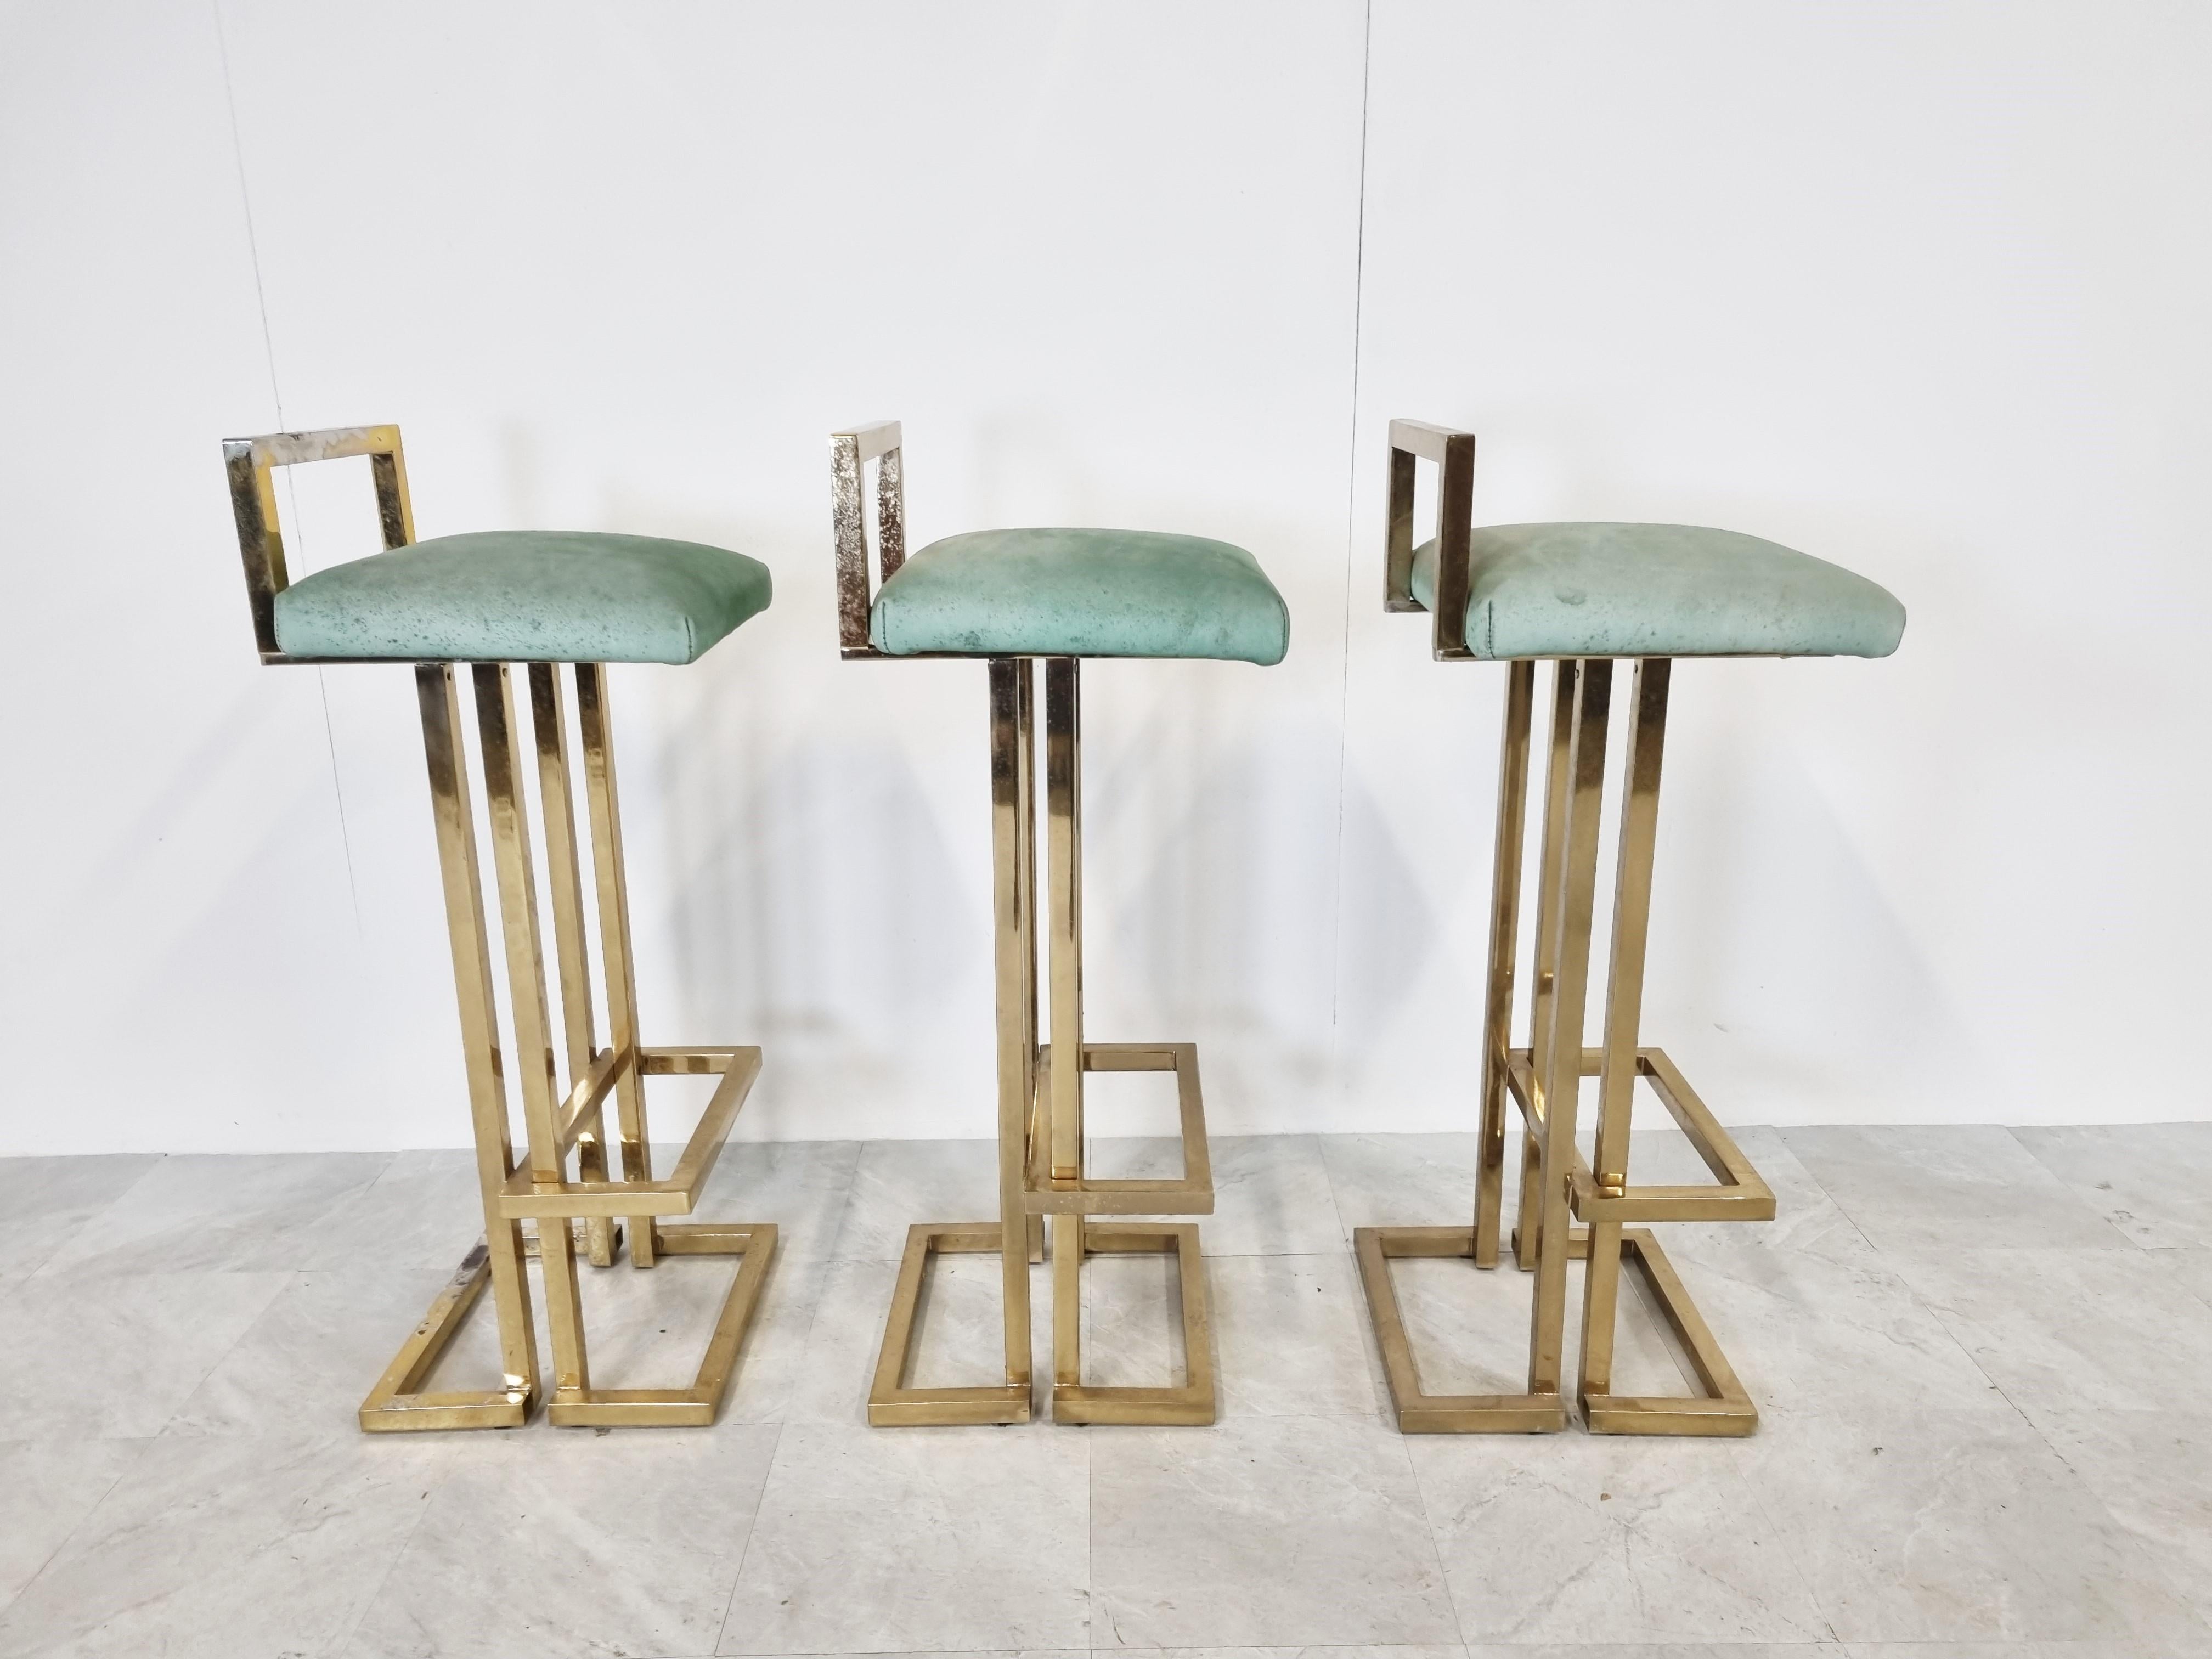 Beautiful brass bar stools by Belgochrom.

Beautiful timeless design with a luxury appeal.

They have their original green alcantara upholstery.

Condition: - Two stools are in good original condition
 - The third stools has faded brass on